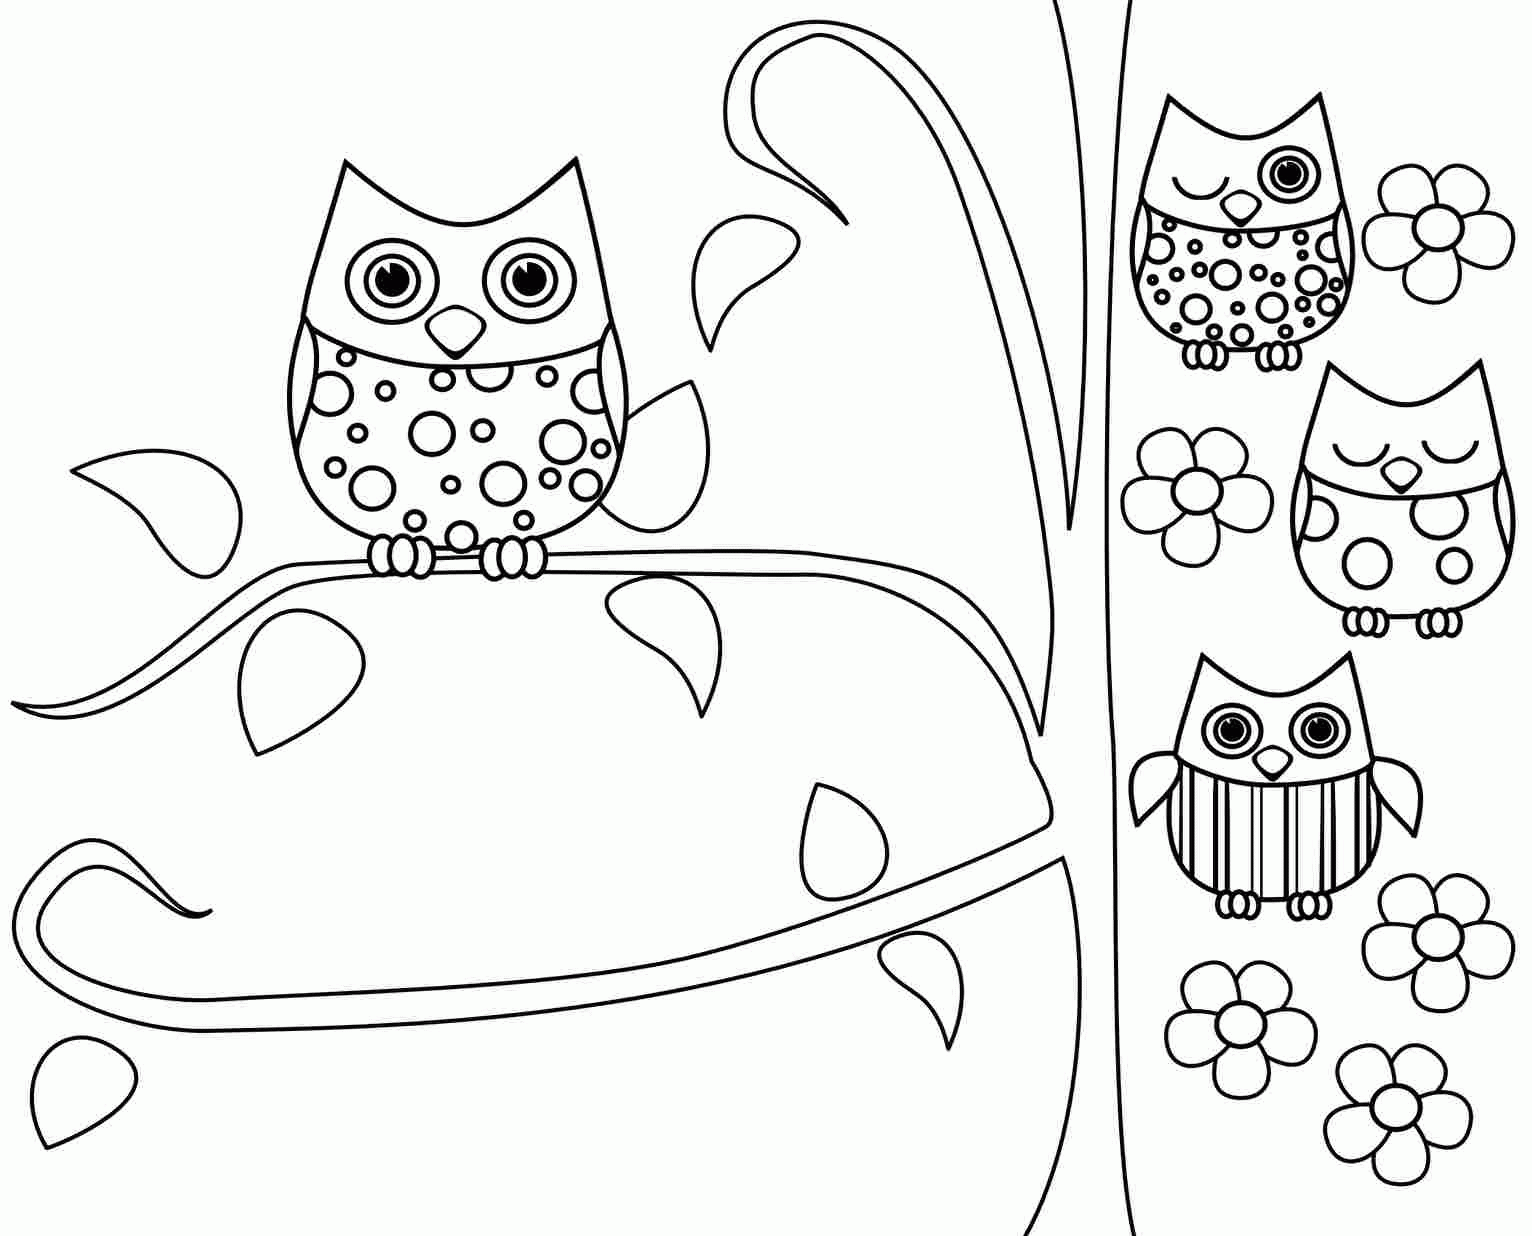 Cute Halloween Owl Coloring Pages Owl Doodle Art Coloring Pages ...